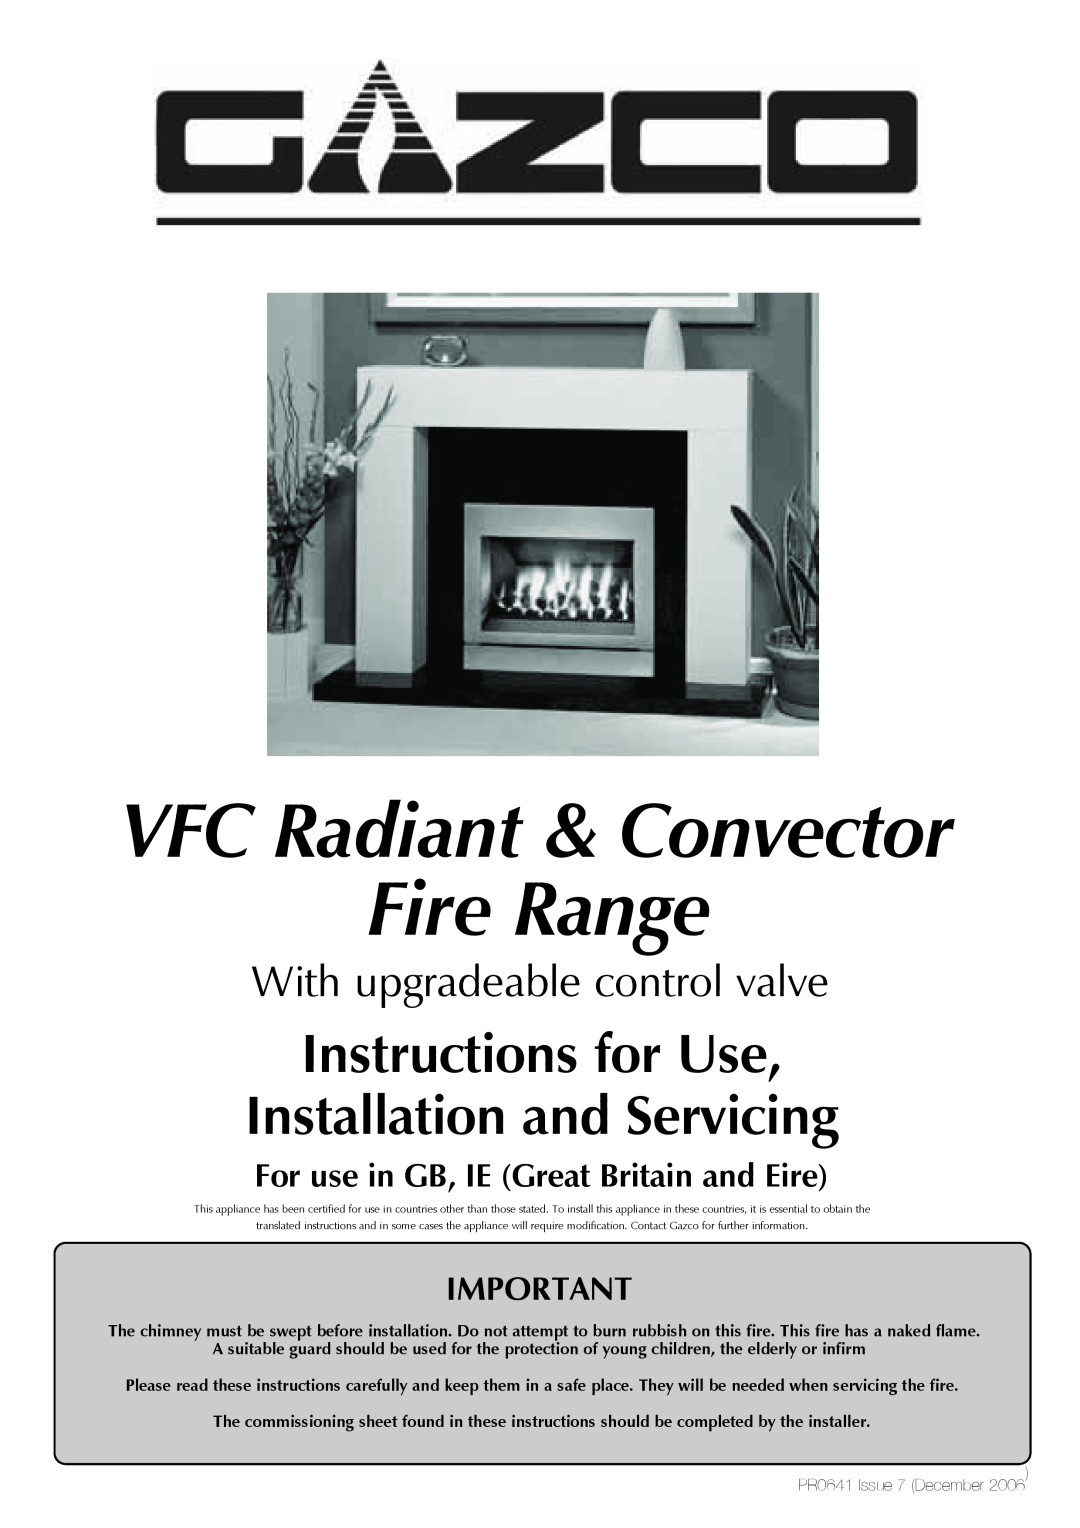 Stovax VFC Radiant & Convector Fire Range manual For use in GB, IE Great Britain and Eire, With upgradeable control valve 